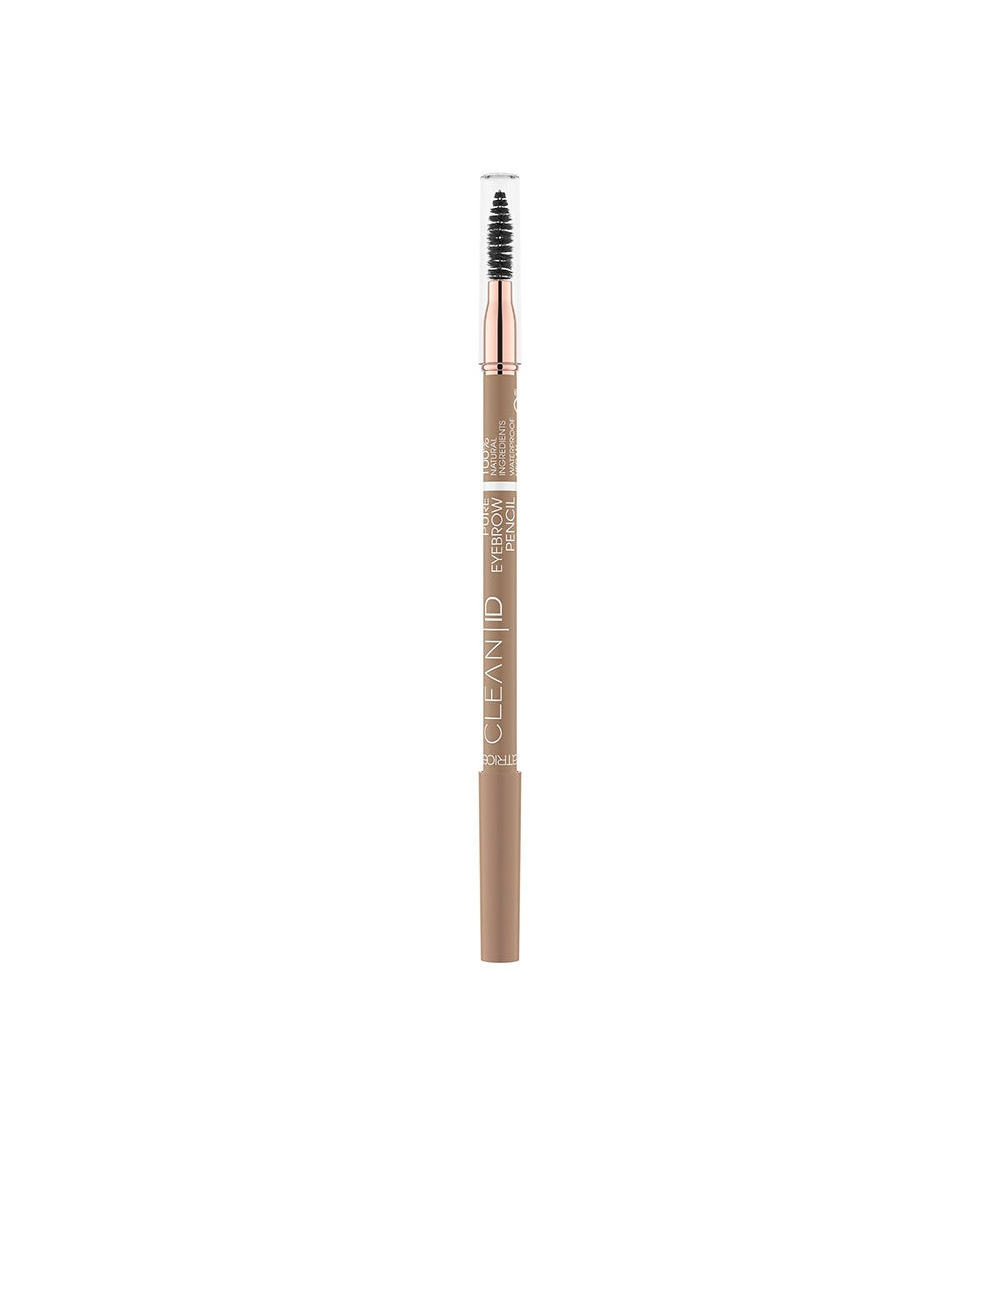 Catrice clean id eyebrow pencil #010-blonde